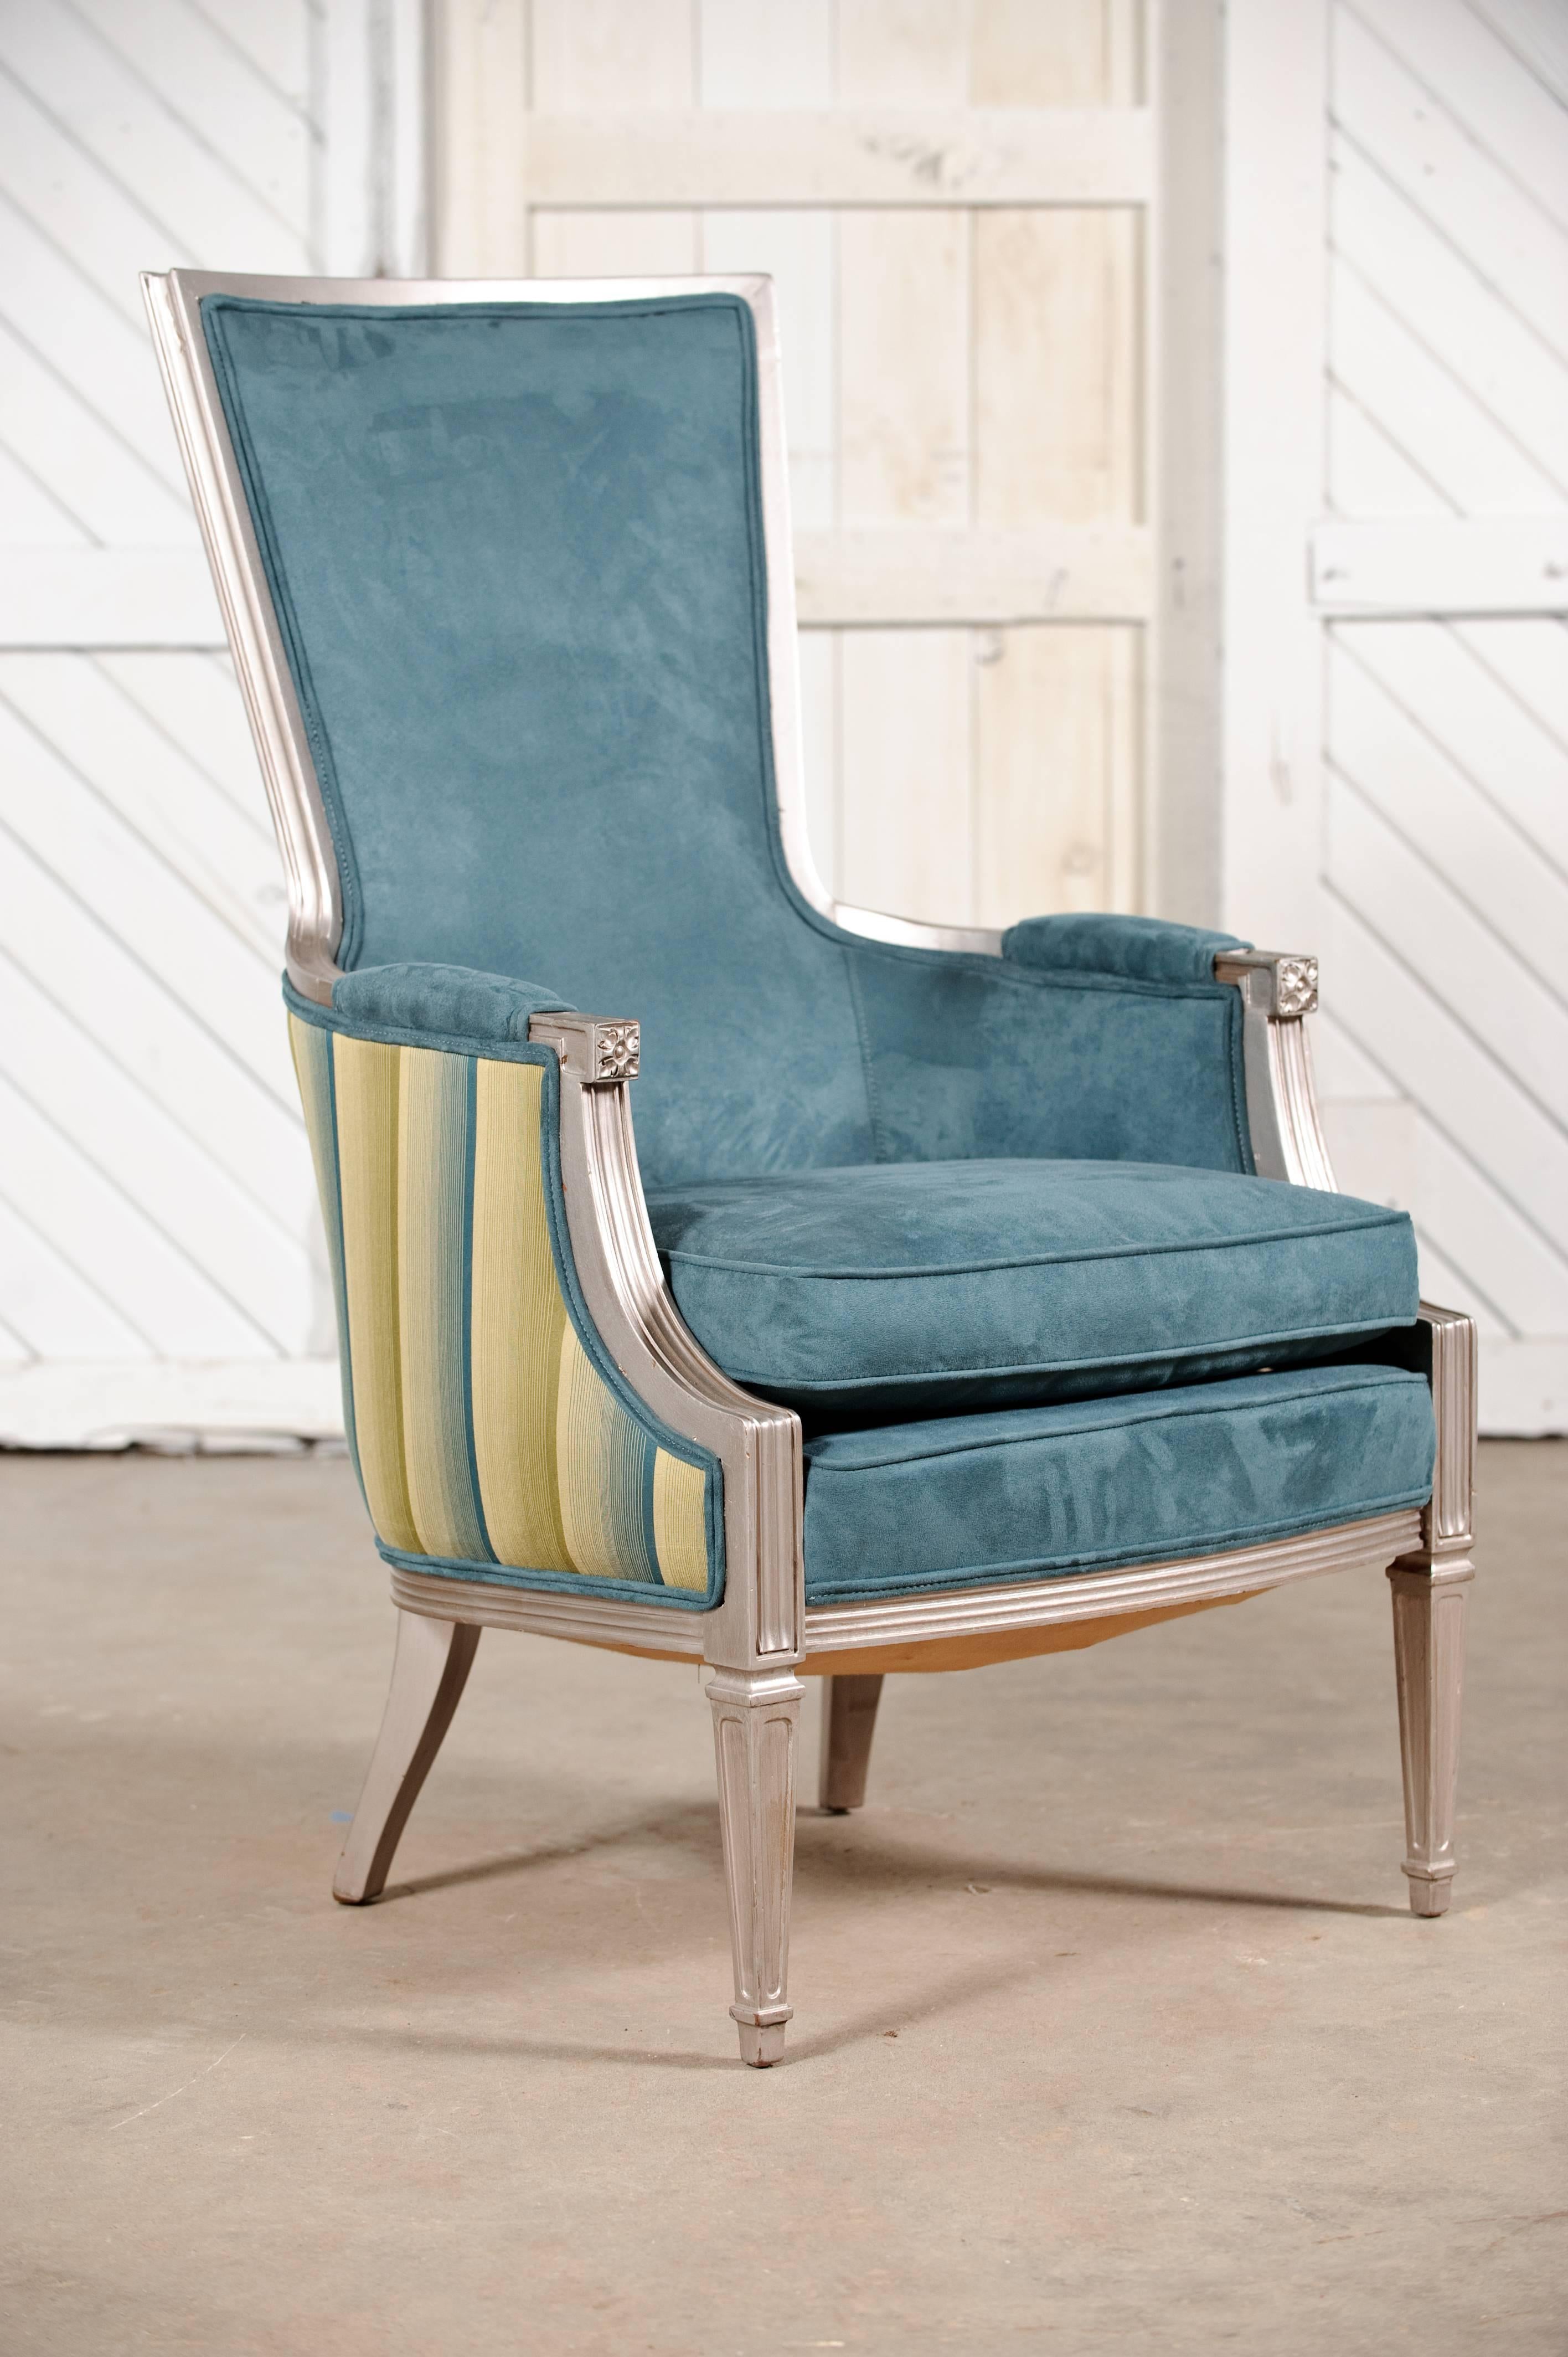 Wood Vintage Neoclassic Chairs in Aqua and Faux Silverleaf